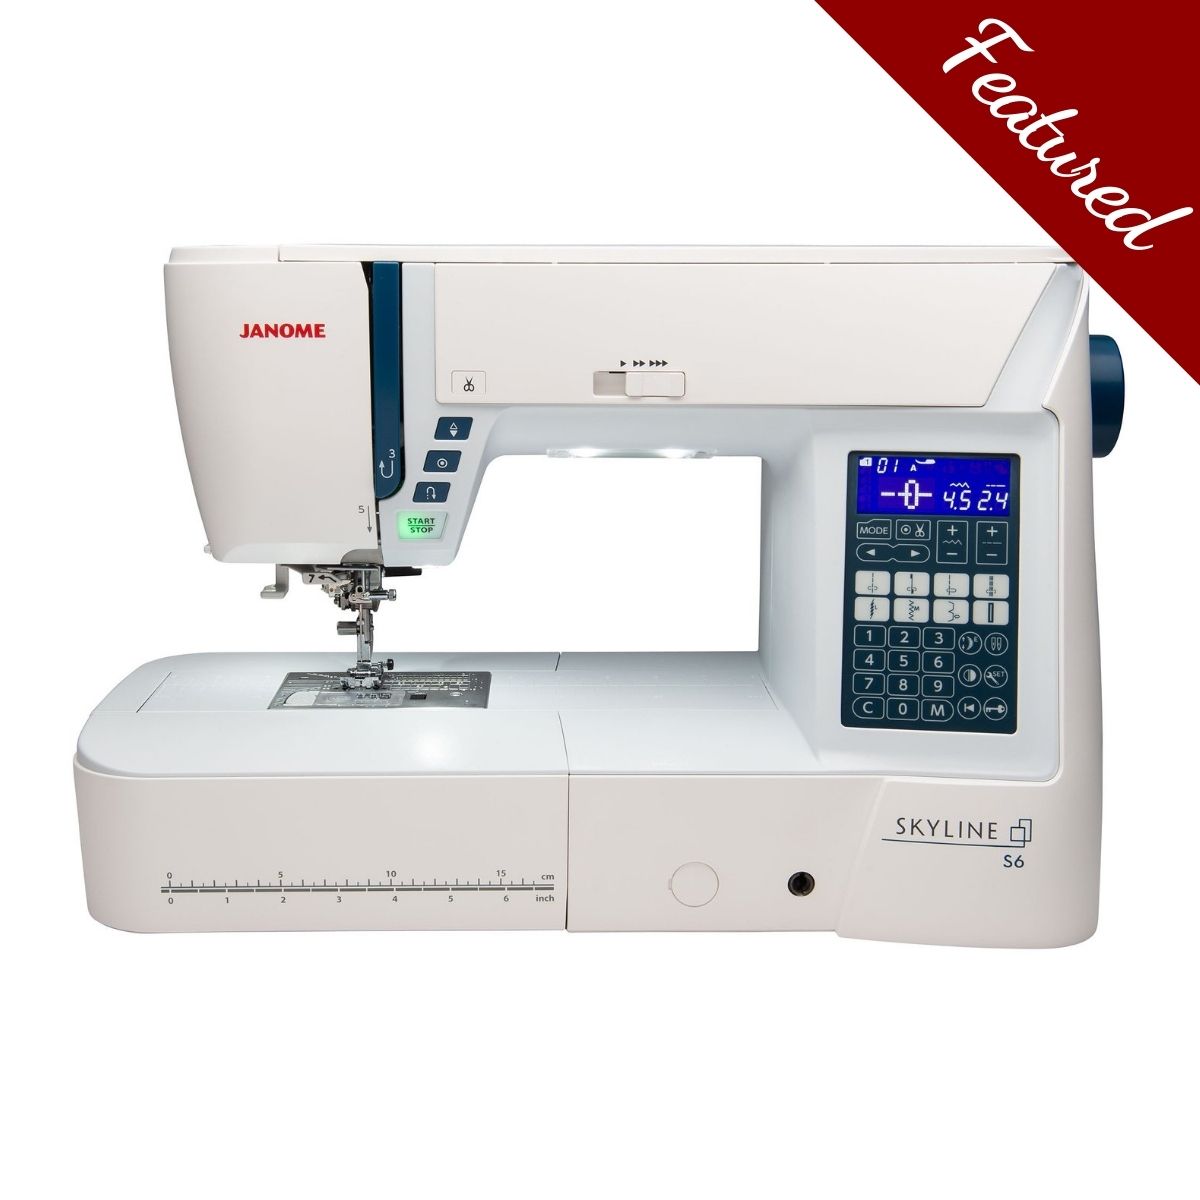 Janome Sewing Machines - Moore's Sewing